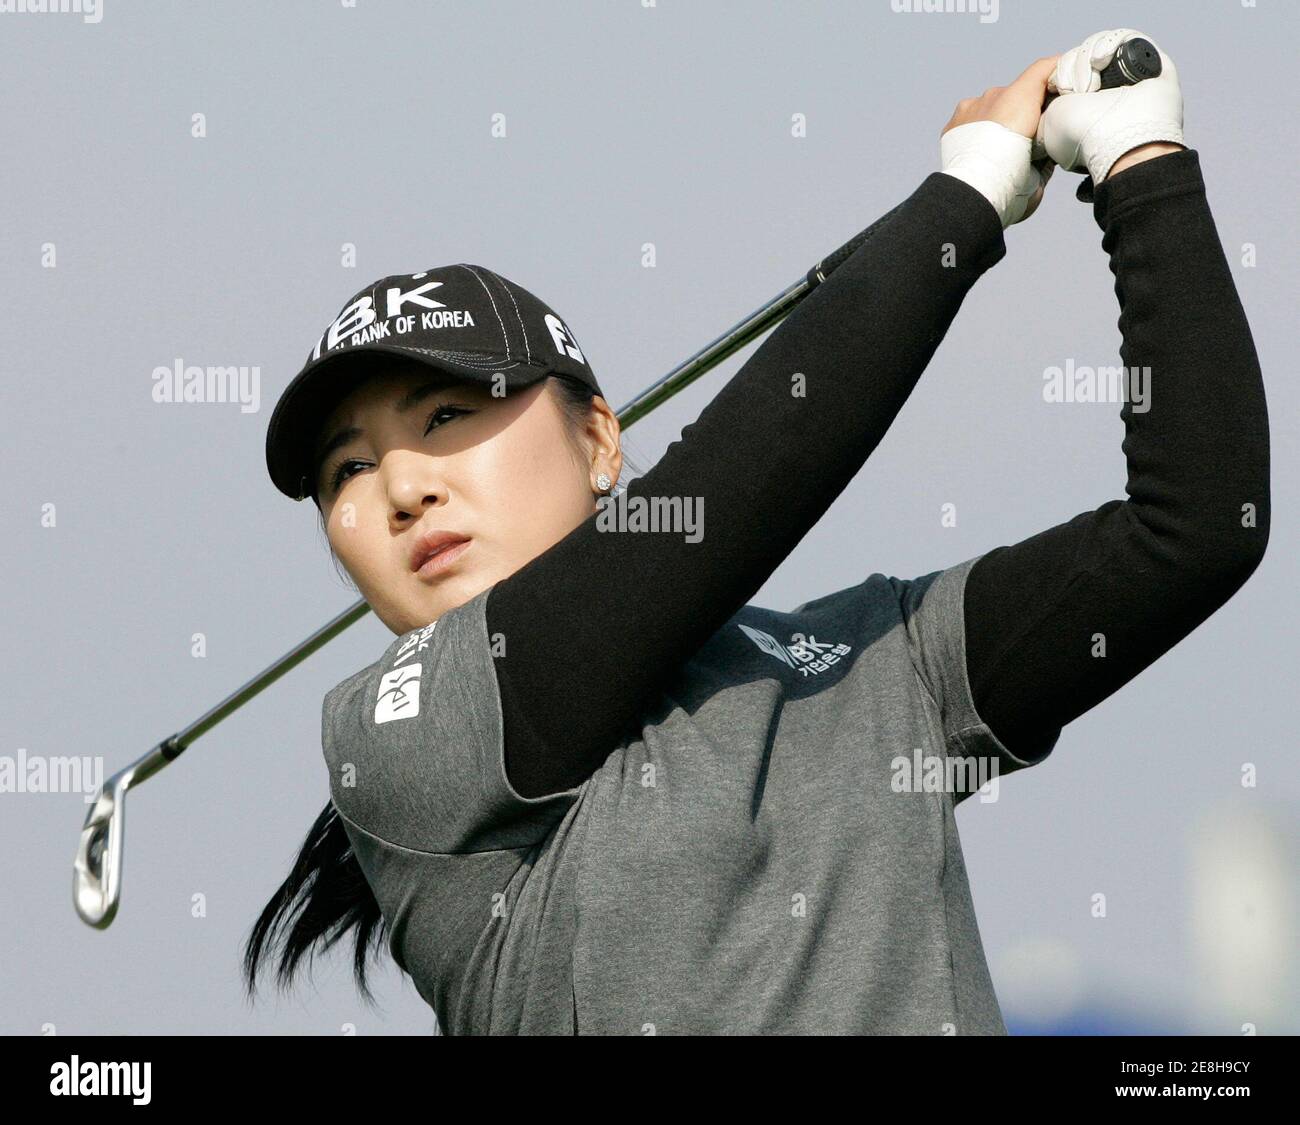 Jang Jeong of South Korea tees off at the 8th hole during the second round of the LPGA Hana Bank-Kolon Championship golf tournament at Sky72 Golf Club Ocean course in Incheon, west of Seoul, November 1, 2008.  REUTERS/Jo Yong-Hak (SOUTH KOREA) Stock Photo